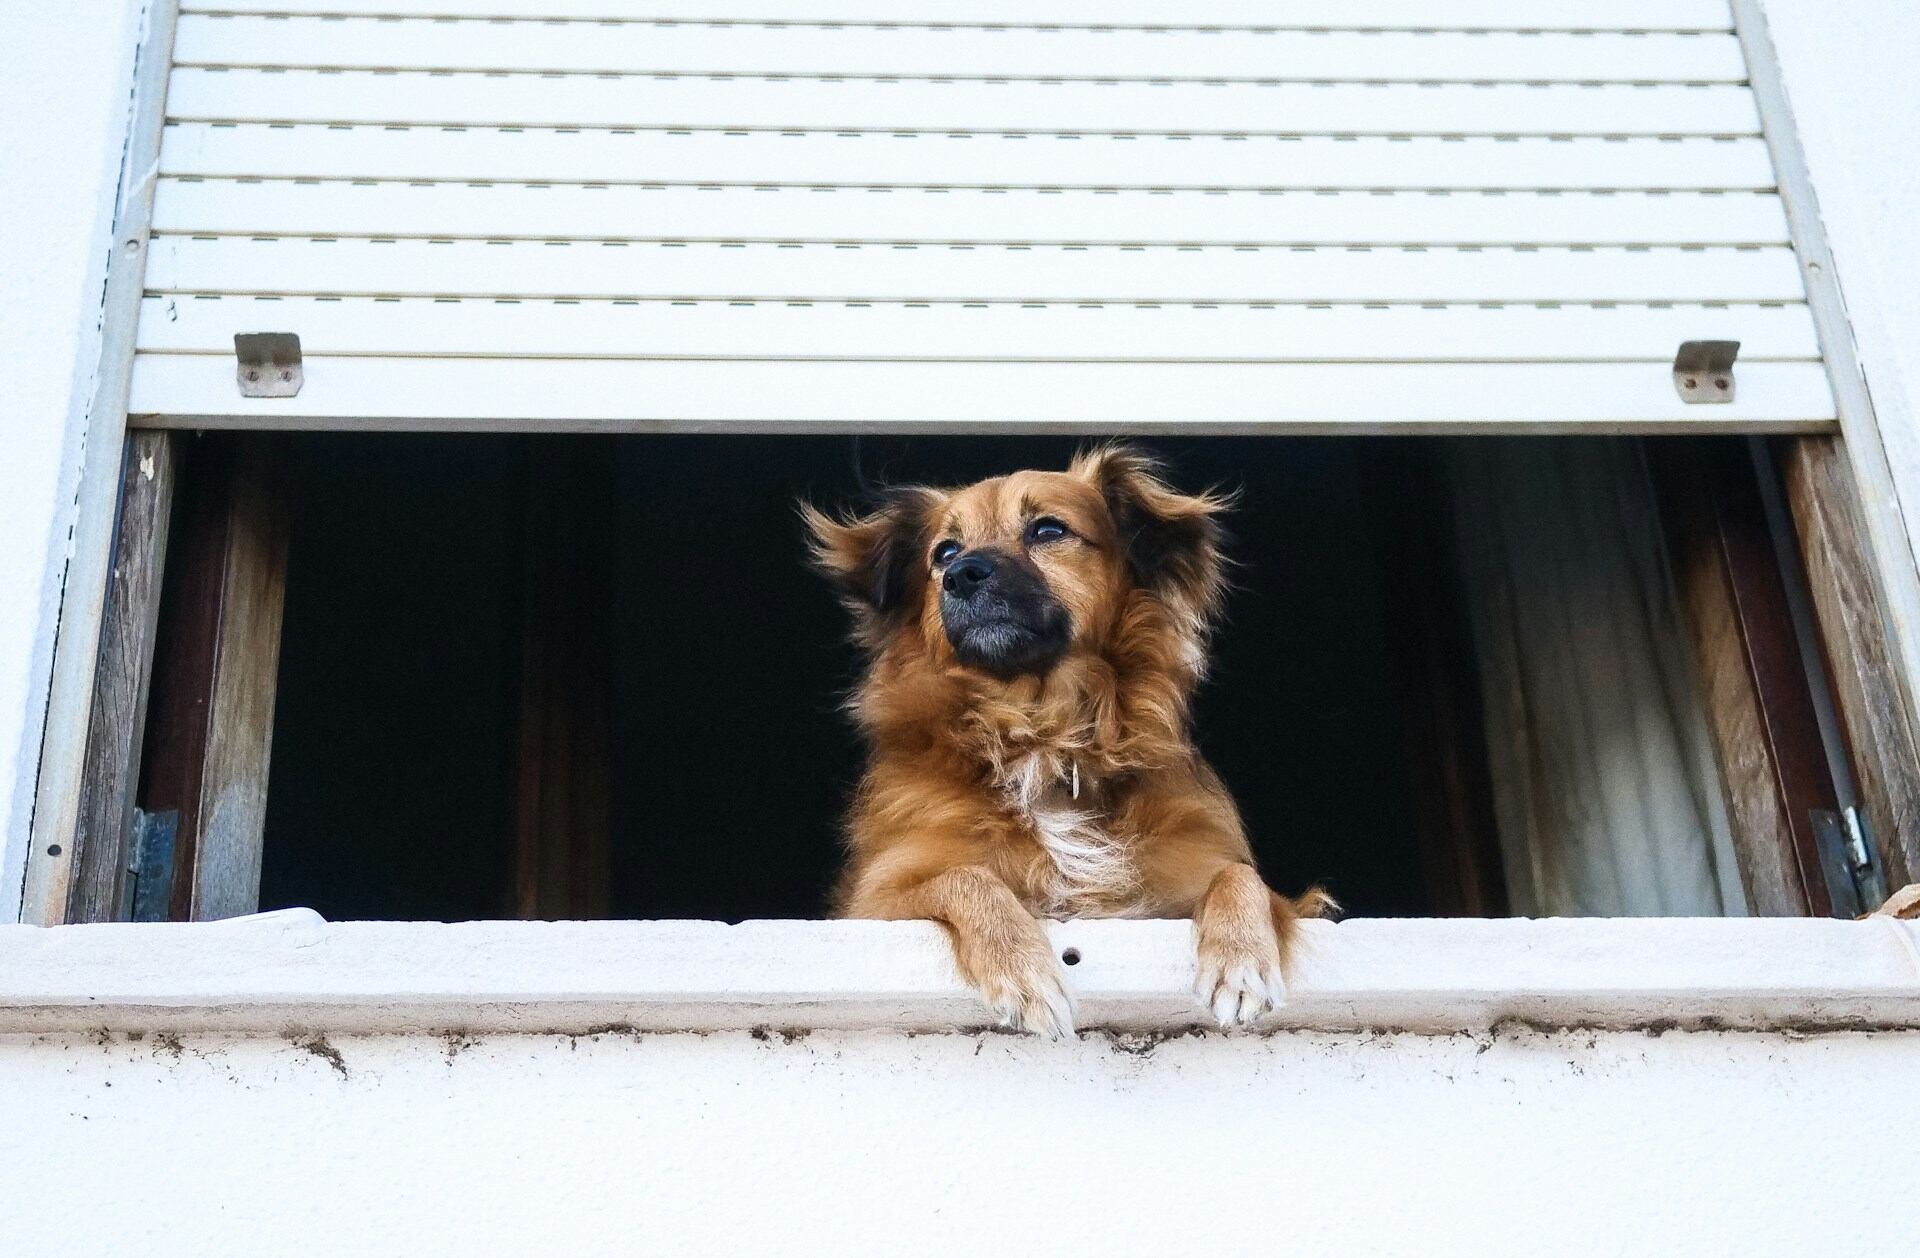 A dog looking out of an open window